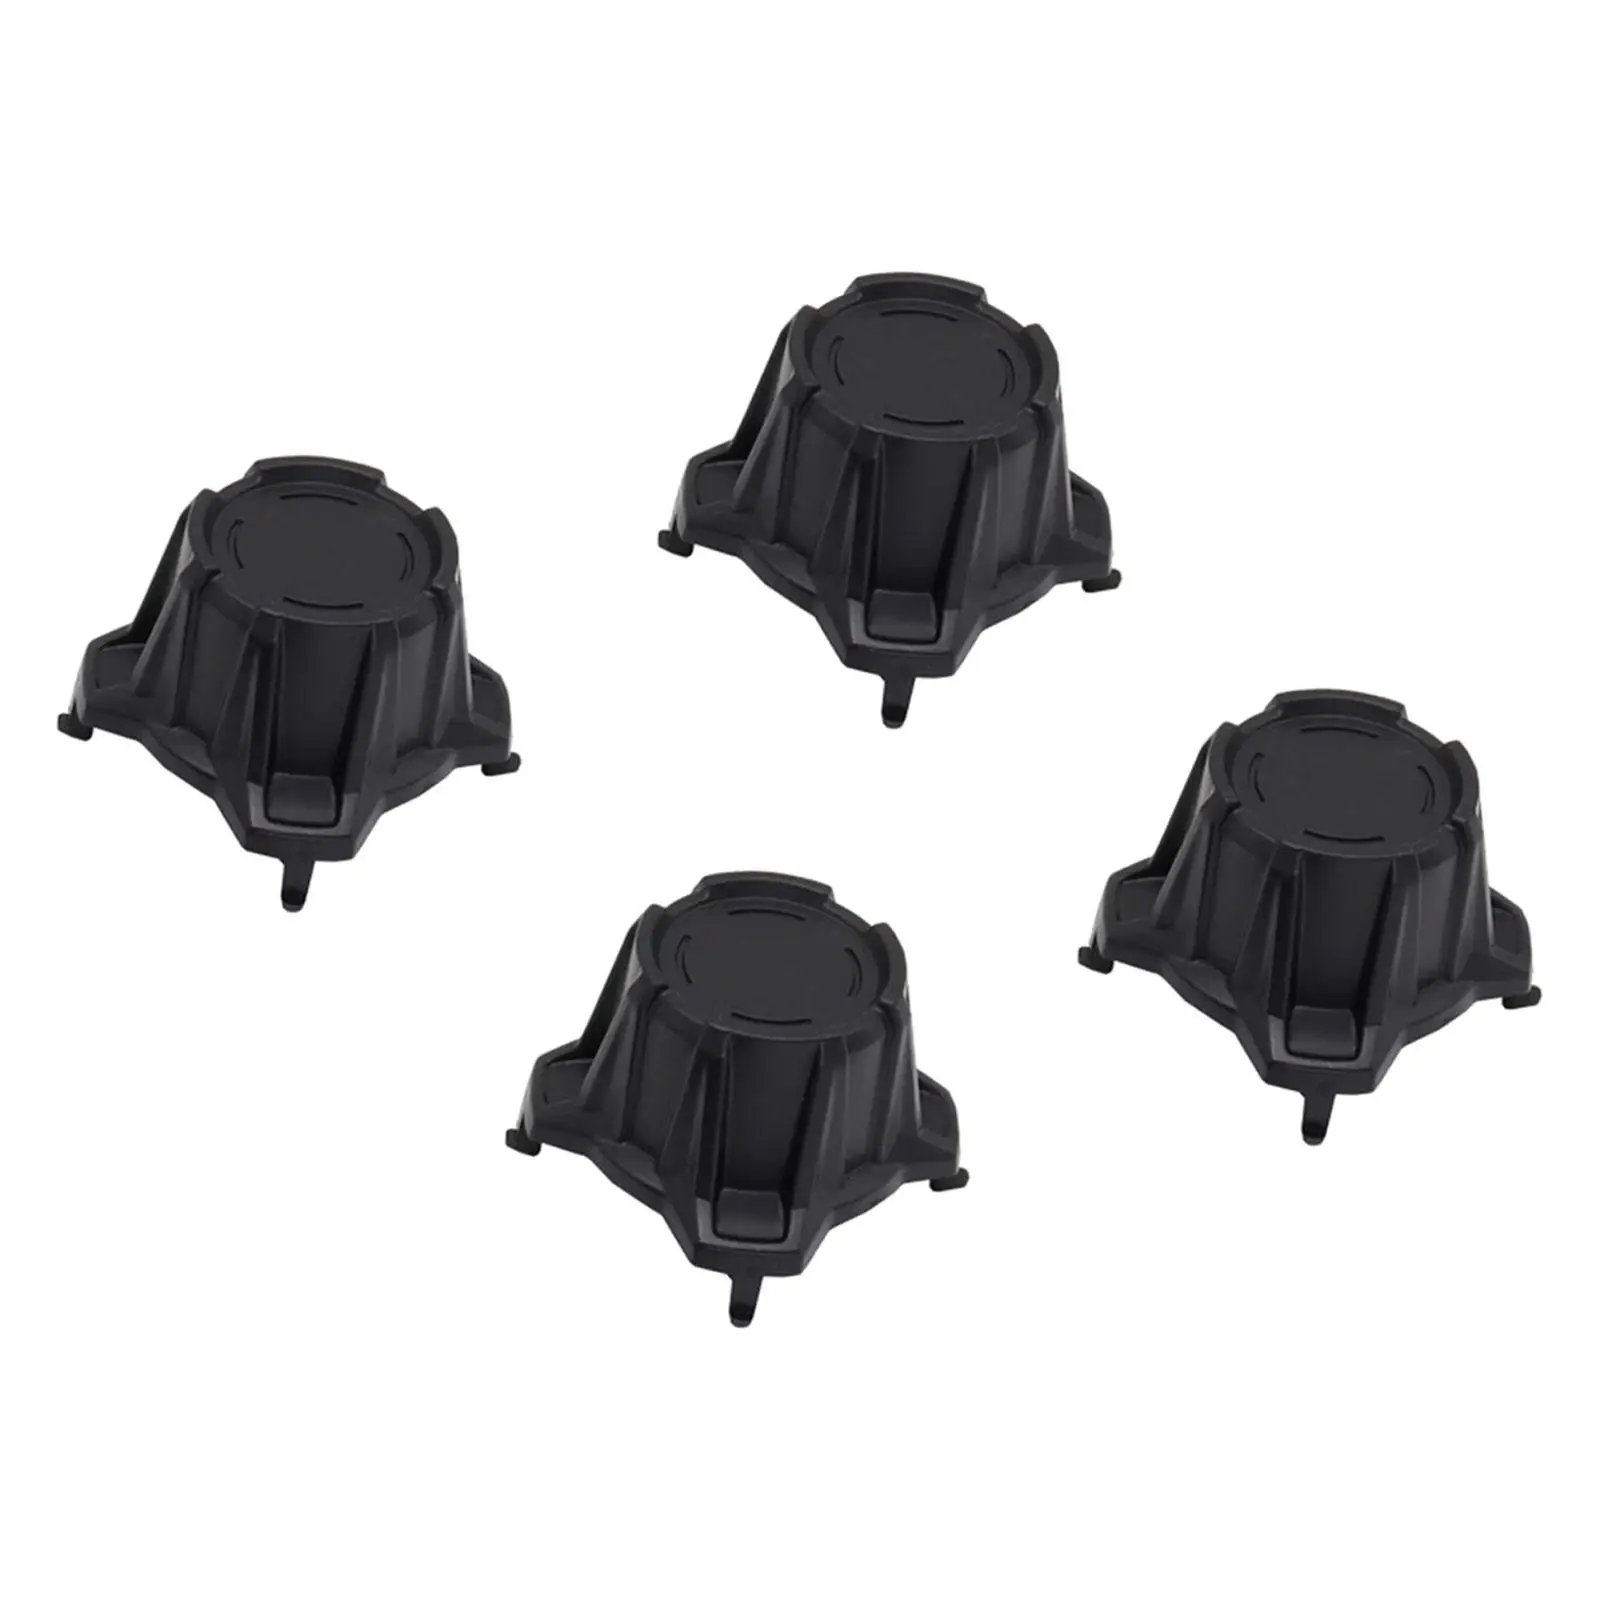 4x Wheel Center Hub Caps Motorcycle Easy Installation Cap Cover for x3 2017-2020 Professional Easily Install Repair Parts